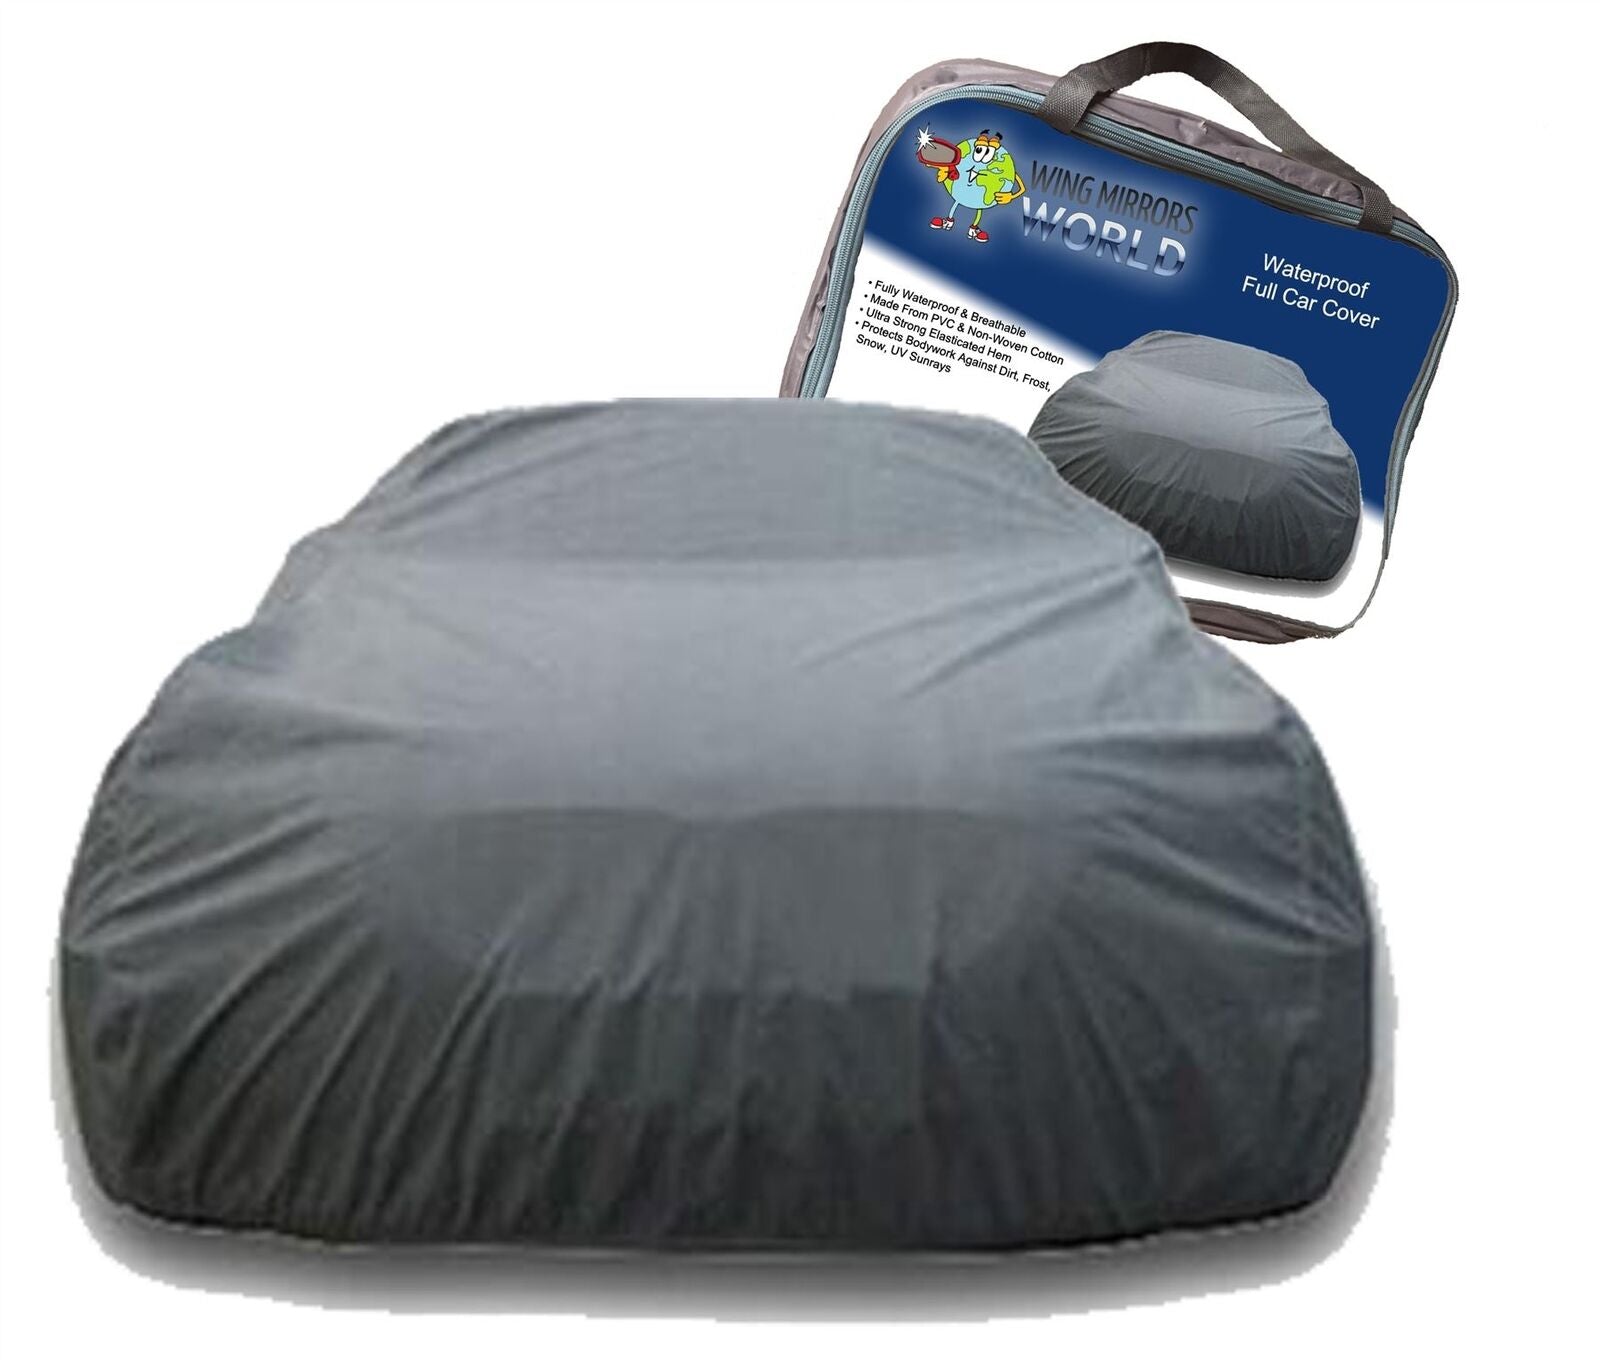 Universal Medium Full Car Cover Waterproof UV Protection Indoor Outdoo —  Wing Mirrors World